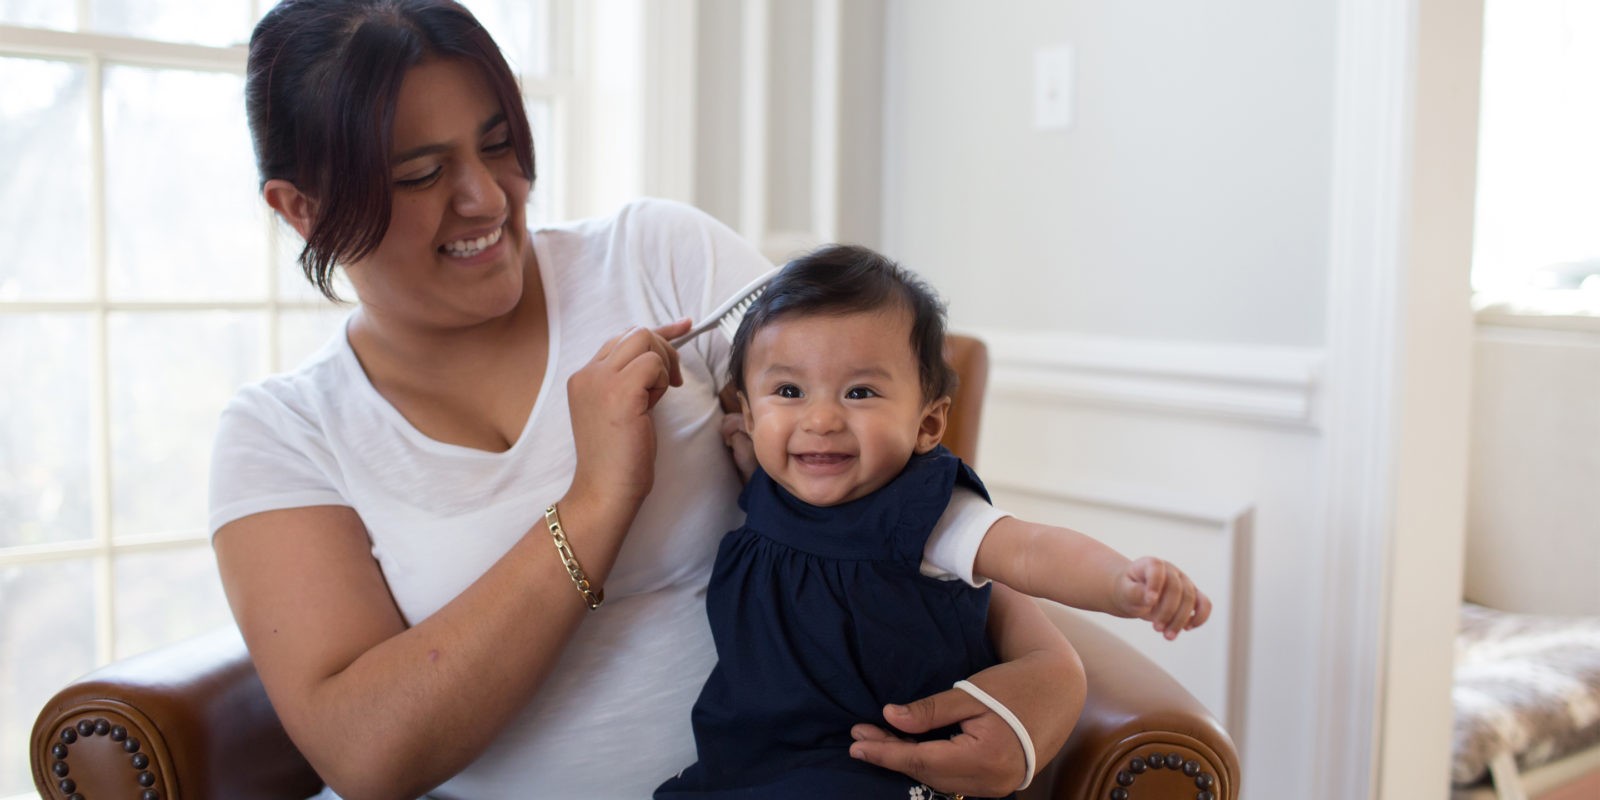 Baby in mother's lap sitting on chair, smiling while hair is being brushed